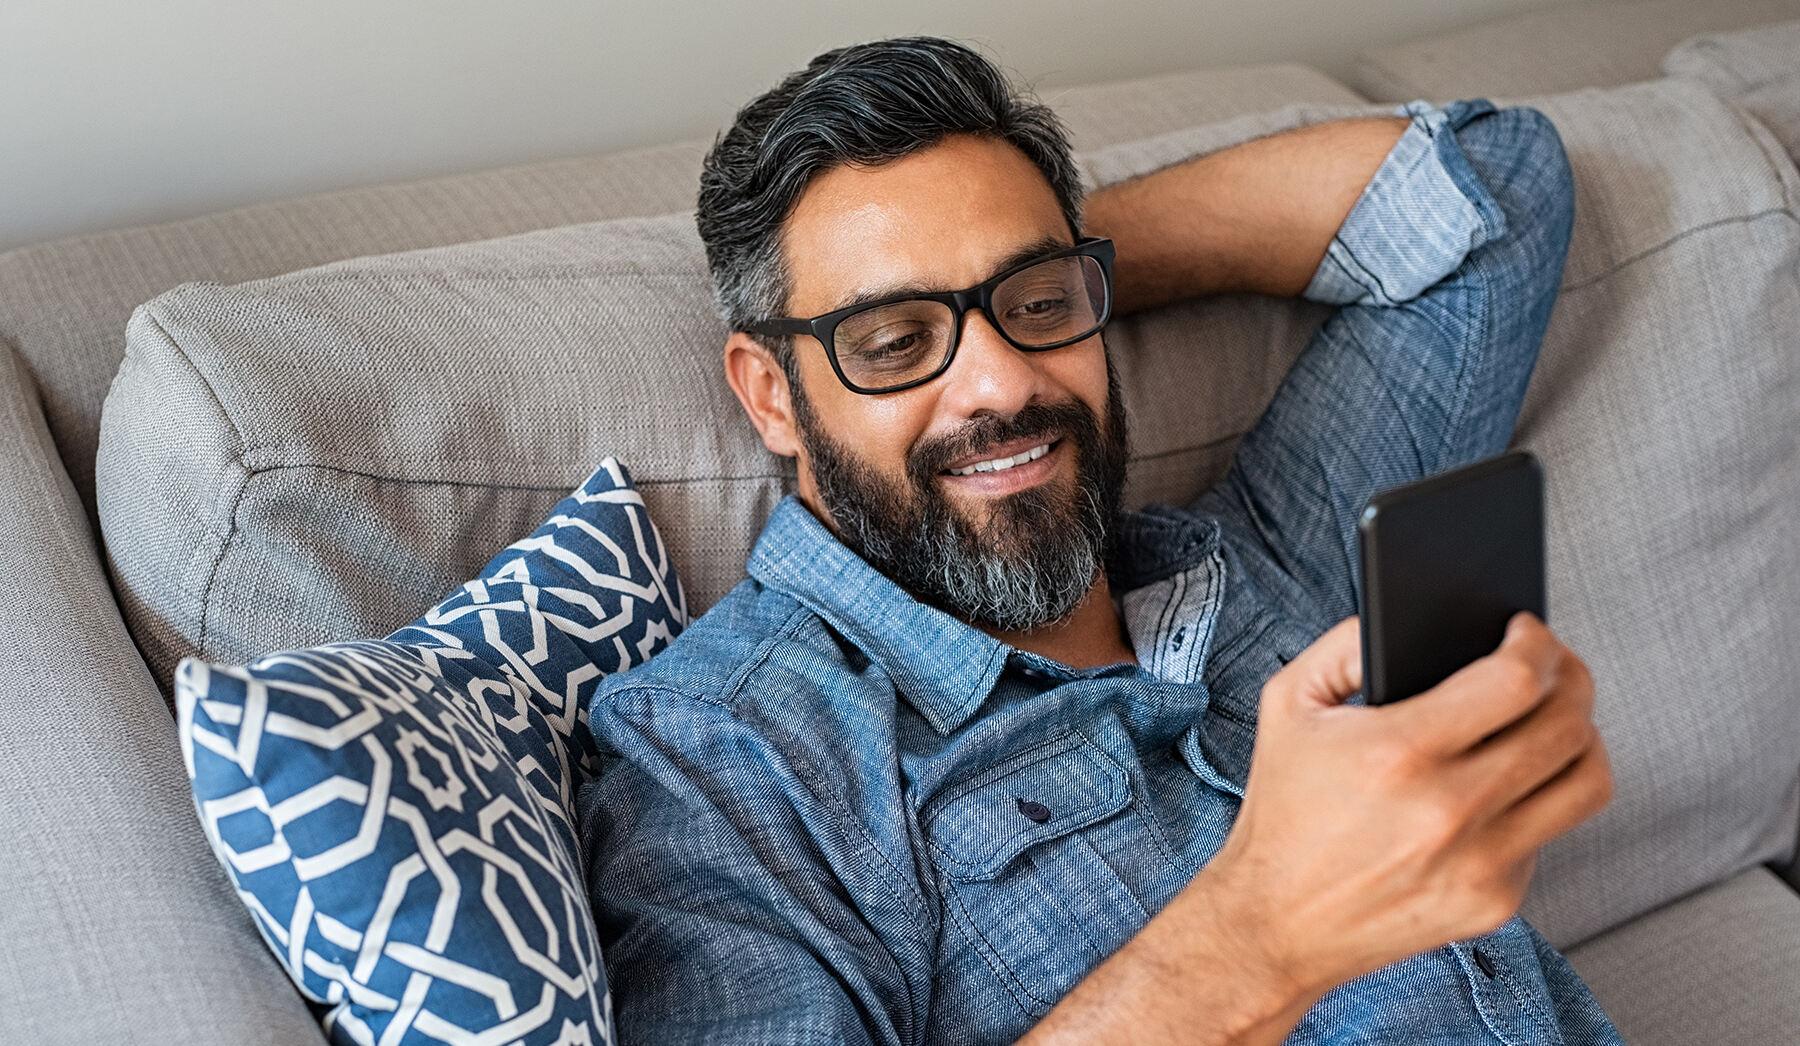 man looking at a phone sitting in a couch